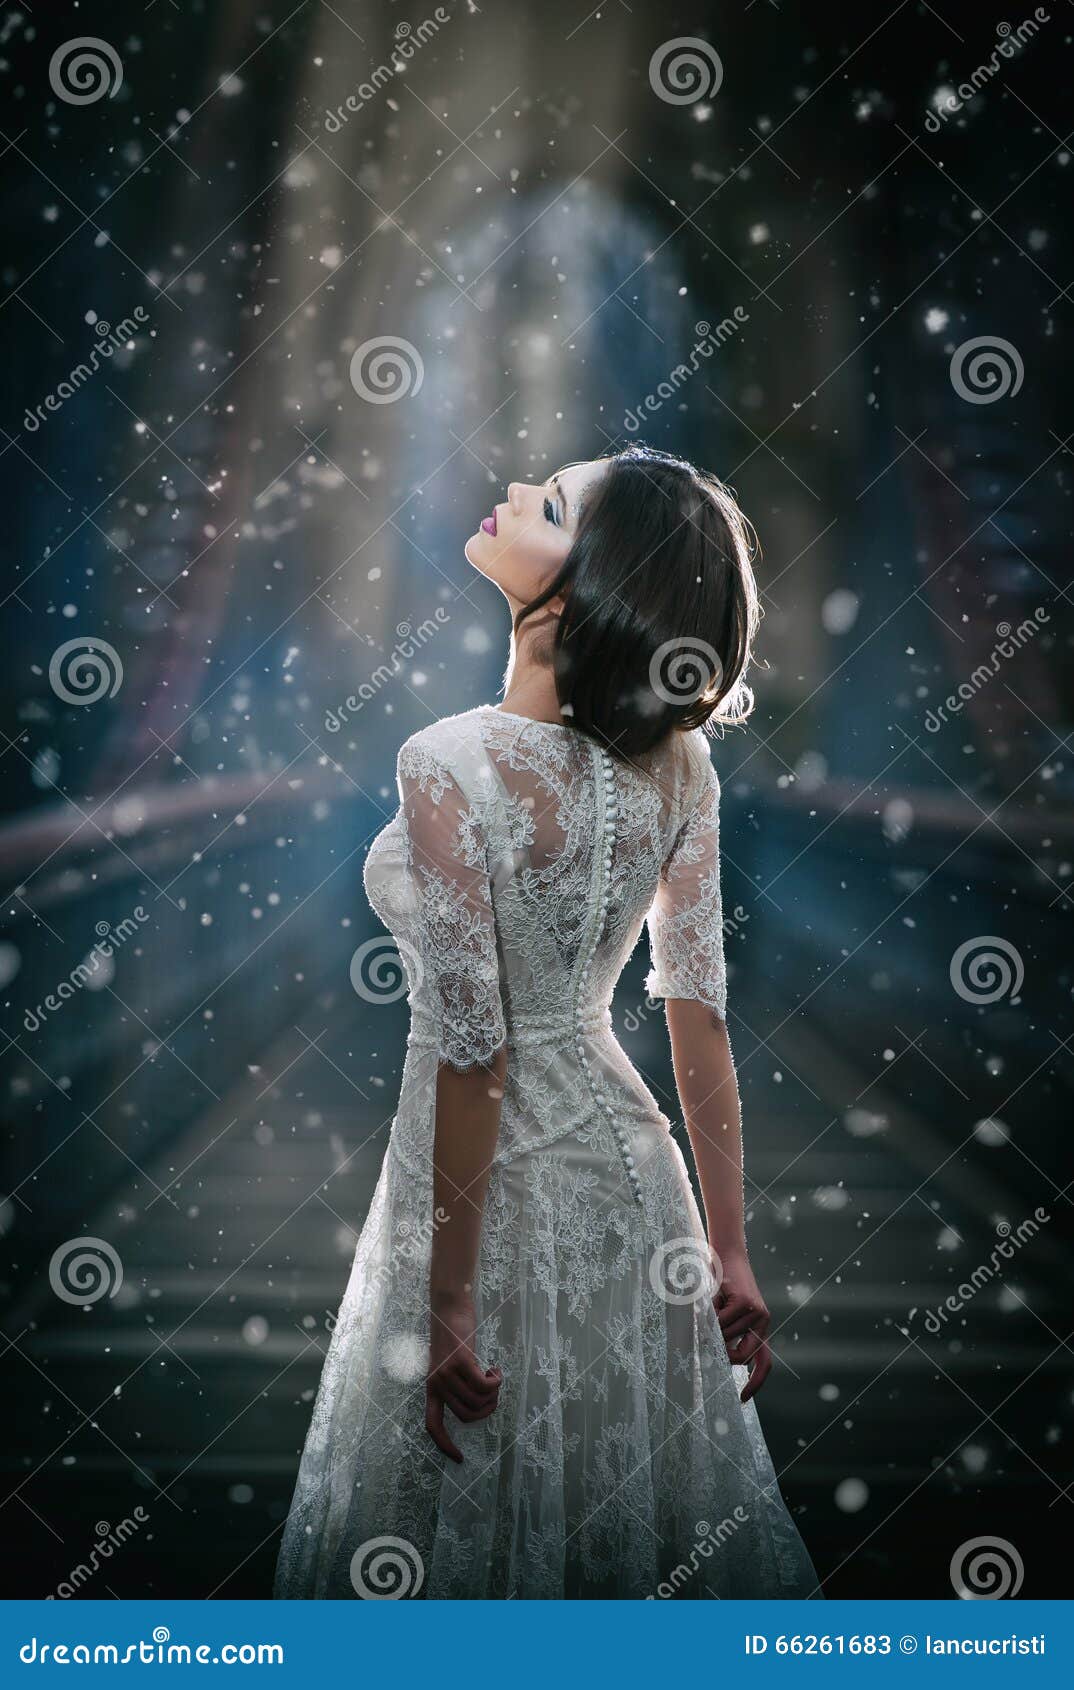 lovely young lady wearing elegant white dress enjoying the beams of celestial light and snowflakes falling on her face